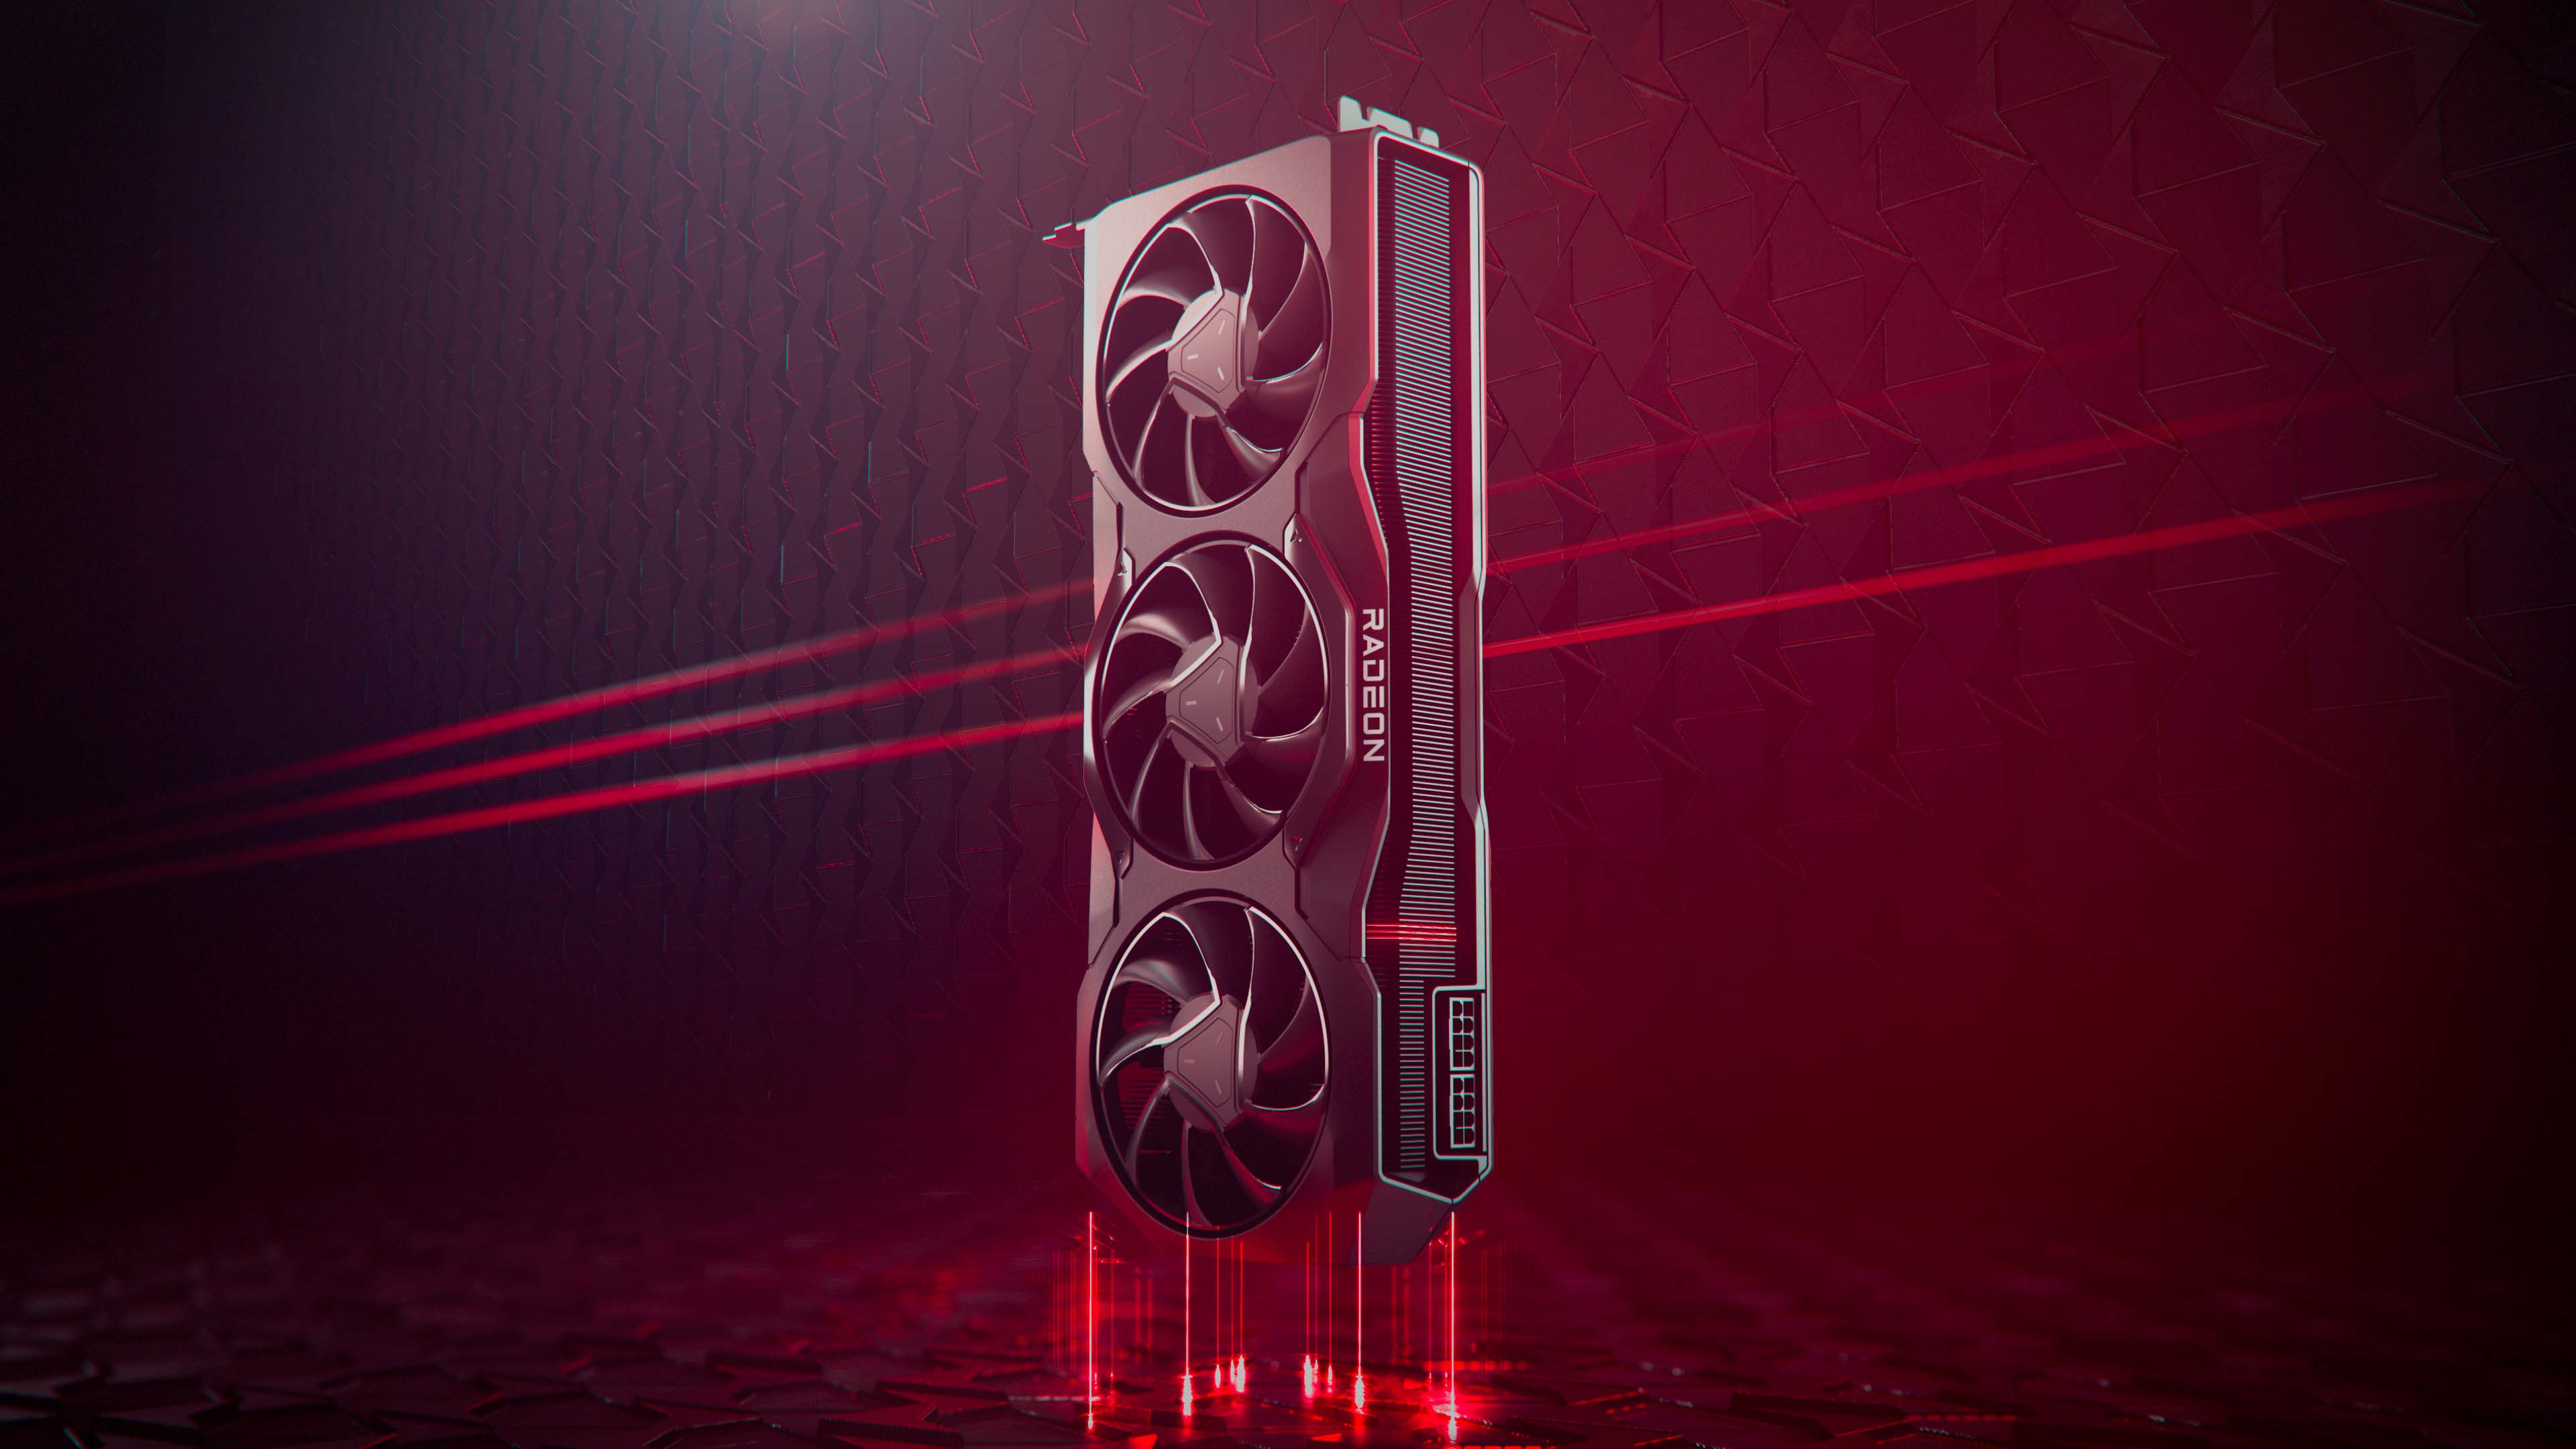 AMD unveils Radeon RX 7900 XT and Radeon RX 7900 XTX for $899 and $999, the  world's first chiplet gaming GPUs